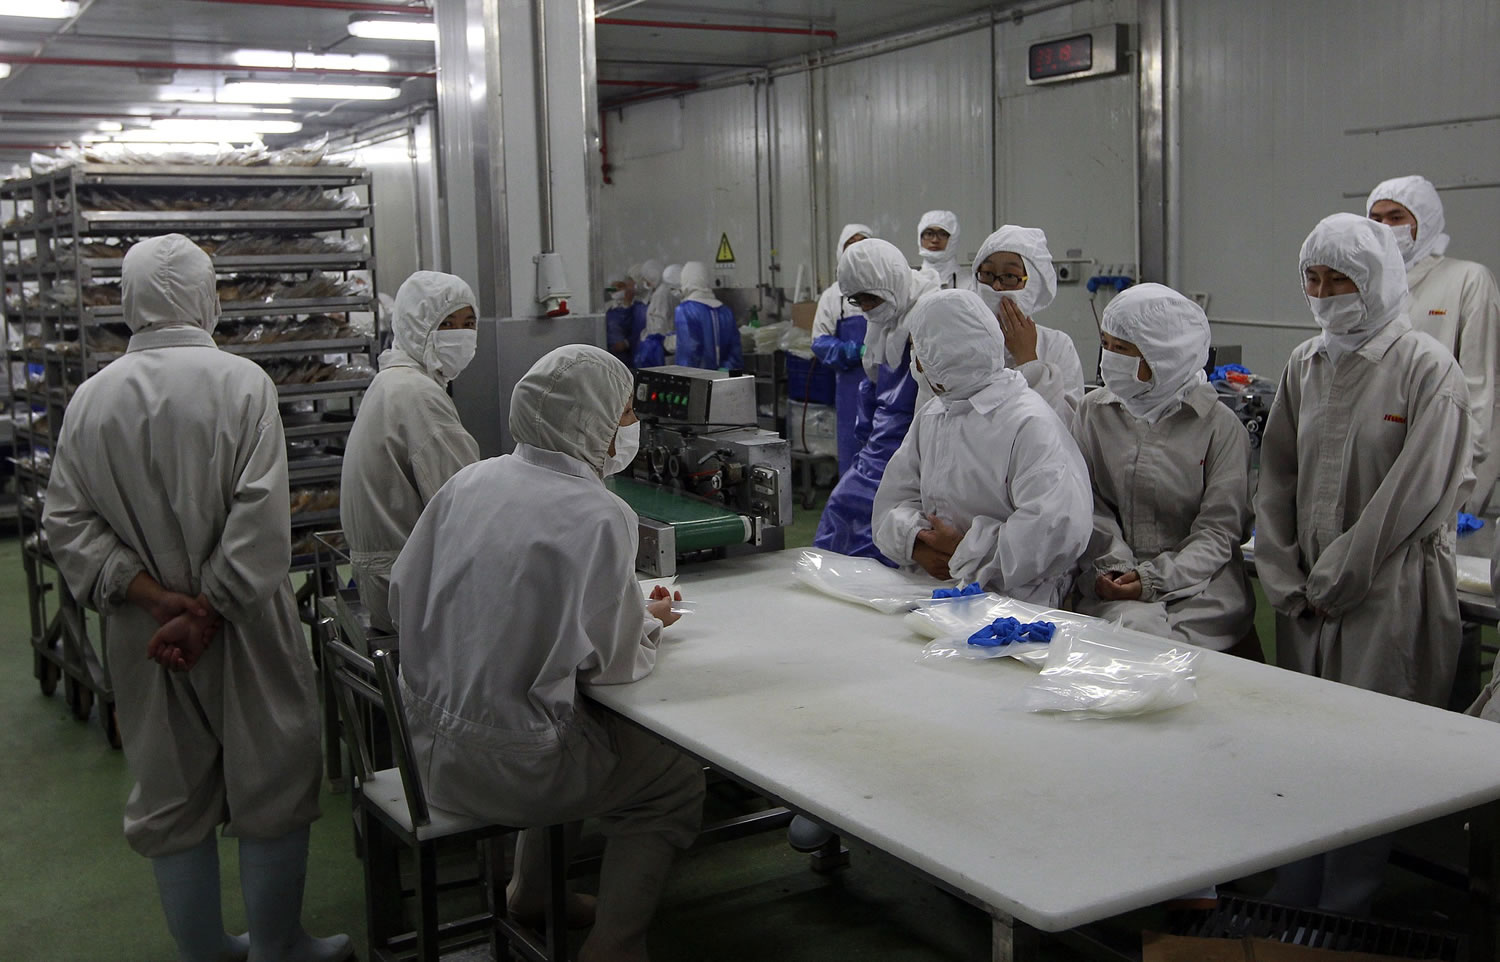 Workers gather while they have nothing to do at the workshop of Shanghai Husi Food Co., a meat supplier for McDonaldu2019s and KFC owned by OSI Group, a privately-held company thatu2019s based in Aurora, Ill.